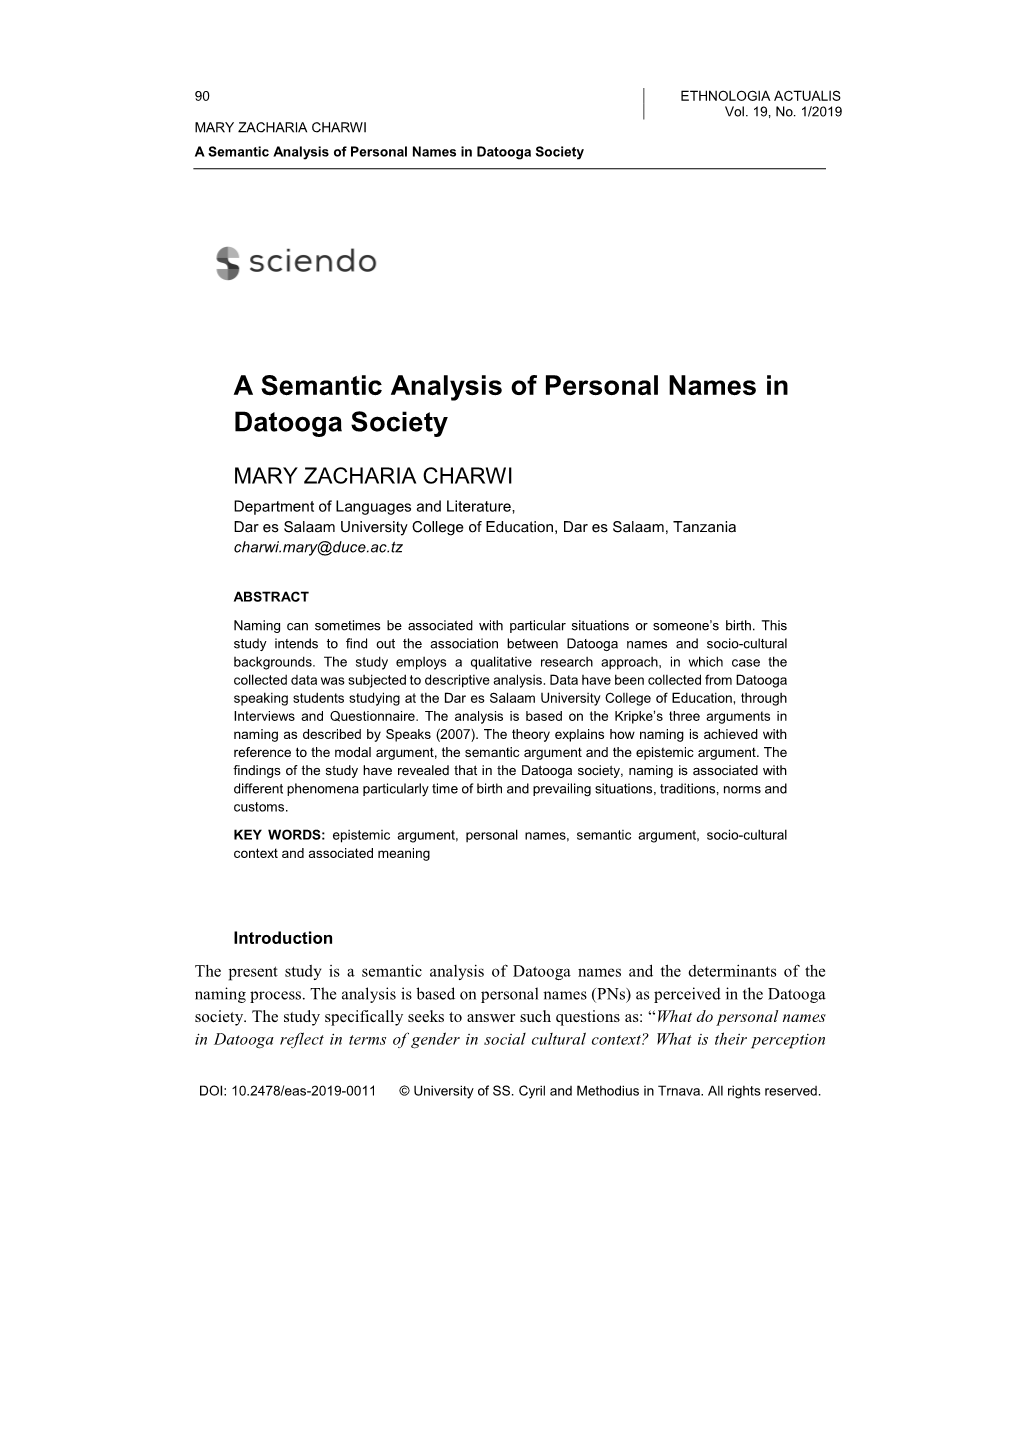 A Semantic Analysis of Personal Names in Datooga Society